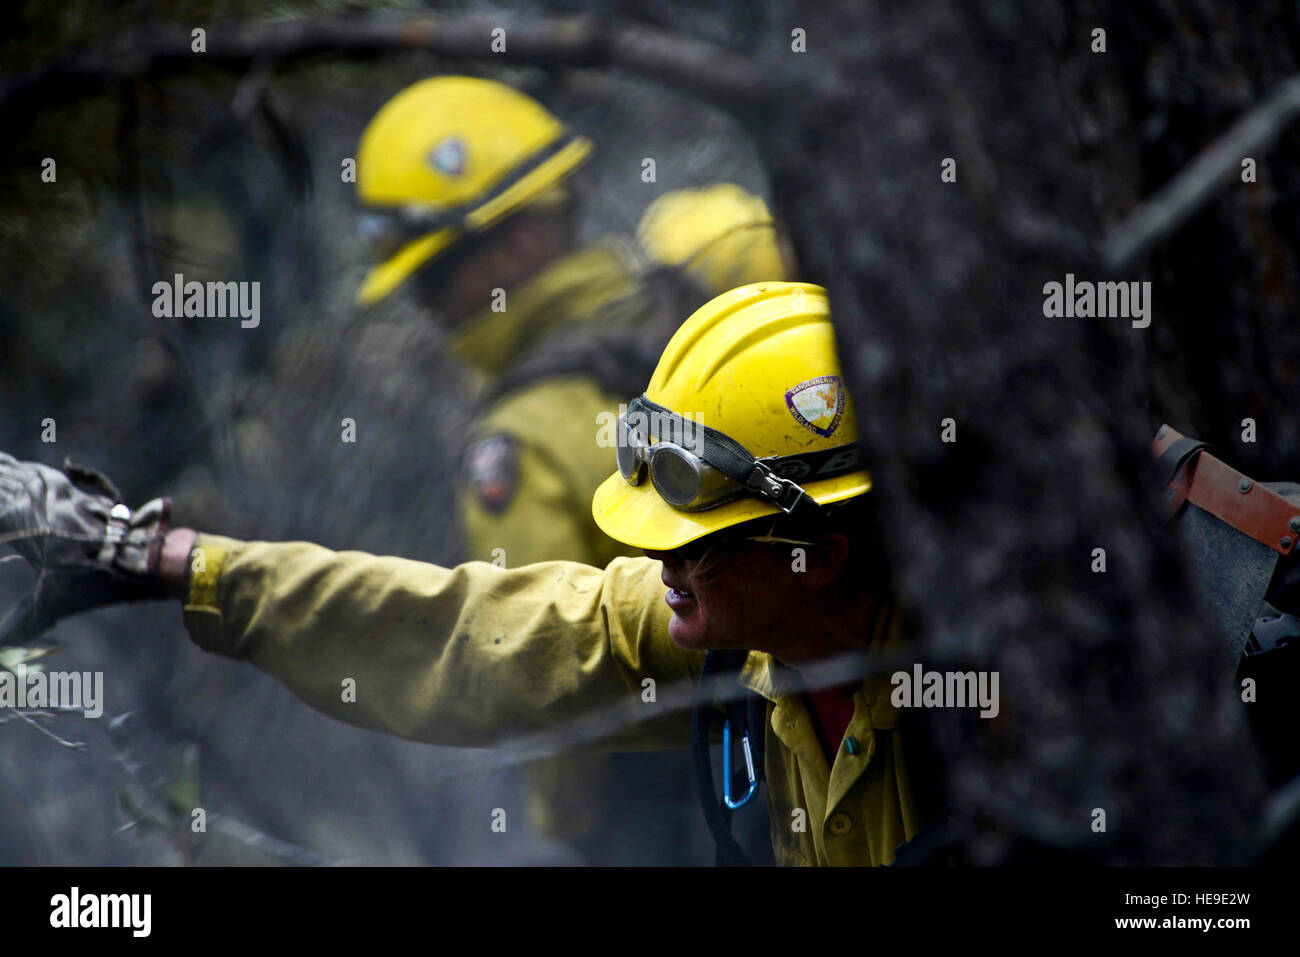 Vandenberg Air Force Base Hot Shot fire fighter Marissa Halbeisen helps cut and clear a fire line on June 28, 2012 in the Mount Saint Francois area of Colorado Springs, Co. while helping to battle several fires in Waldo Canyon.  The Waldo Canyon fire has grown to 18,500 acres and burned over 300 homes. Currently, more than 90 firefighters from the Academy, along with assets from Air Force Space Command; F.E. Warren Air Force Base, Wyo.; Fort Carson, Colo.; and the local community continue to fight the Waldo Canyon fire.(: Master Sgt. Jeremy Lock) (Released) Stock Photo